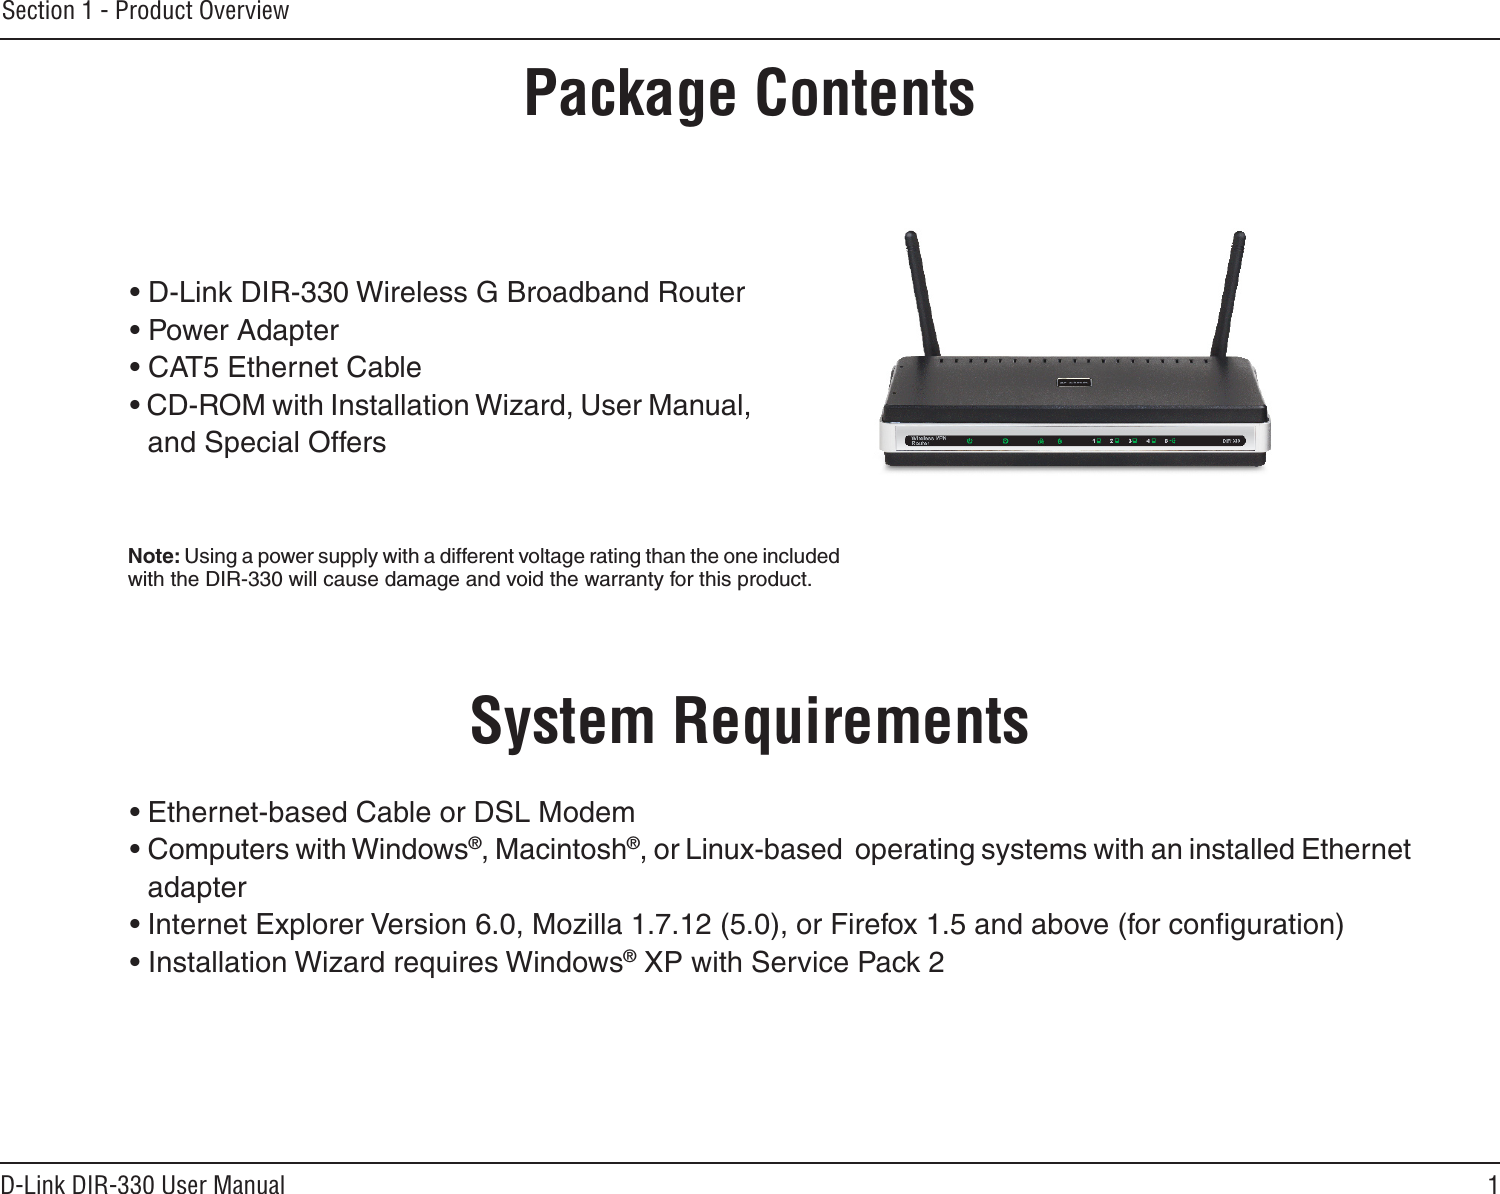 1D-Link DIR-330 User ManualSection 1 - Product Overview• D-Link DIR-330 Wireless G Broadband Router• Power Adapter• CAT5 Ethernet Cable• CD-ROM with Installation Wizard, User Manual, and Special OffersSystem Requirements• Ethernet-based Cable or DSL Modem• Computers with Windows®, Macintosh®, or Linux-based  operating systems with an installed Ethernet adapter• Internet Explorer Version 6.0, Mozilla 1.7.12 (5.0), or Firefox 1.5 and above (for conﬁguration)• Installation Wizard requires Windows® XP with Service Pack 2Product OverviewPackage ContentsNote: Using a power supply with a different voltage rating than the one included with the DIR-330 will cause damage and void the warranty for this product.